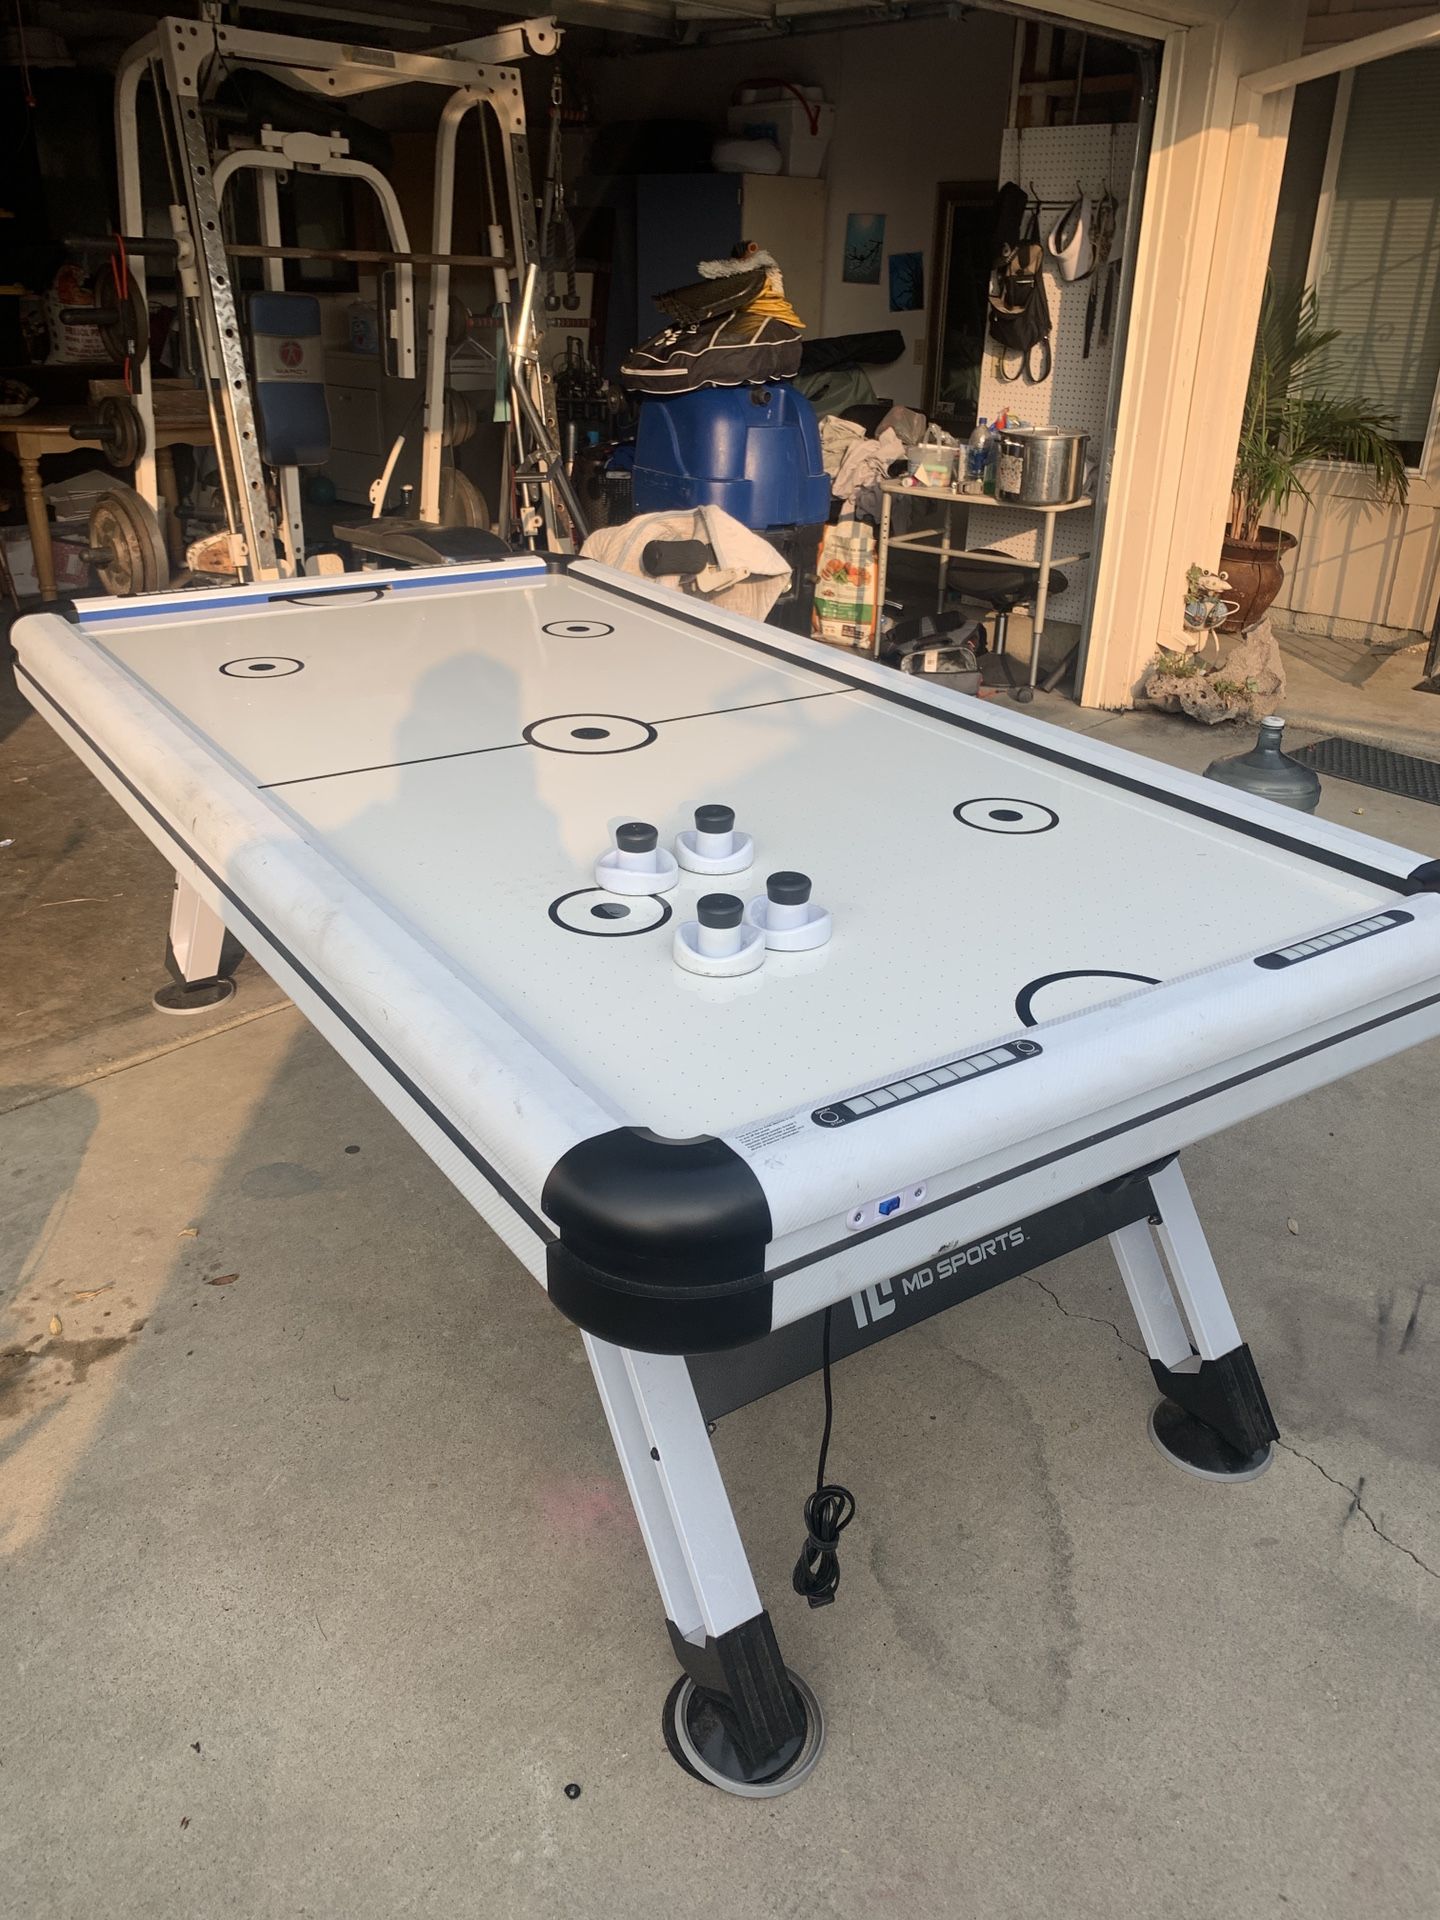 MD Sports Air Hockey Table like new